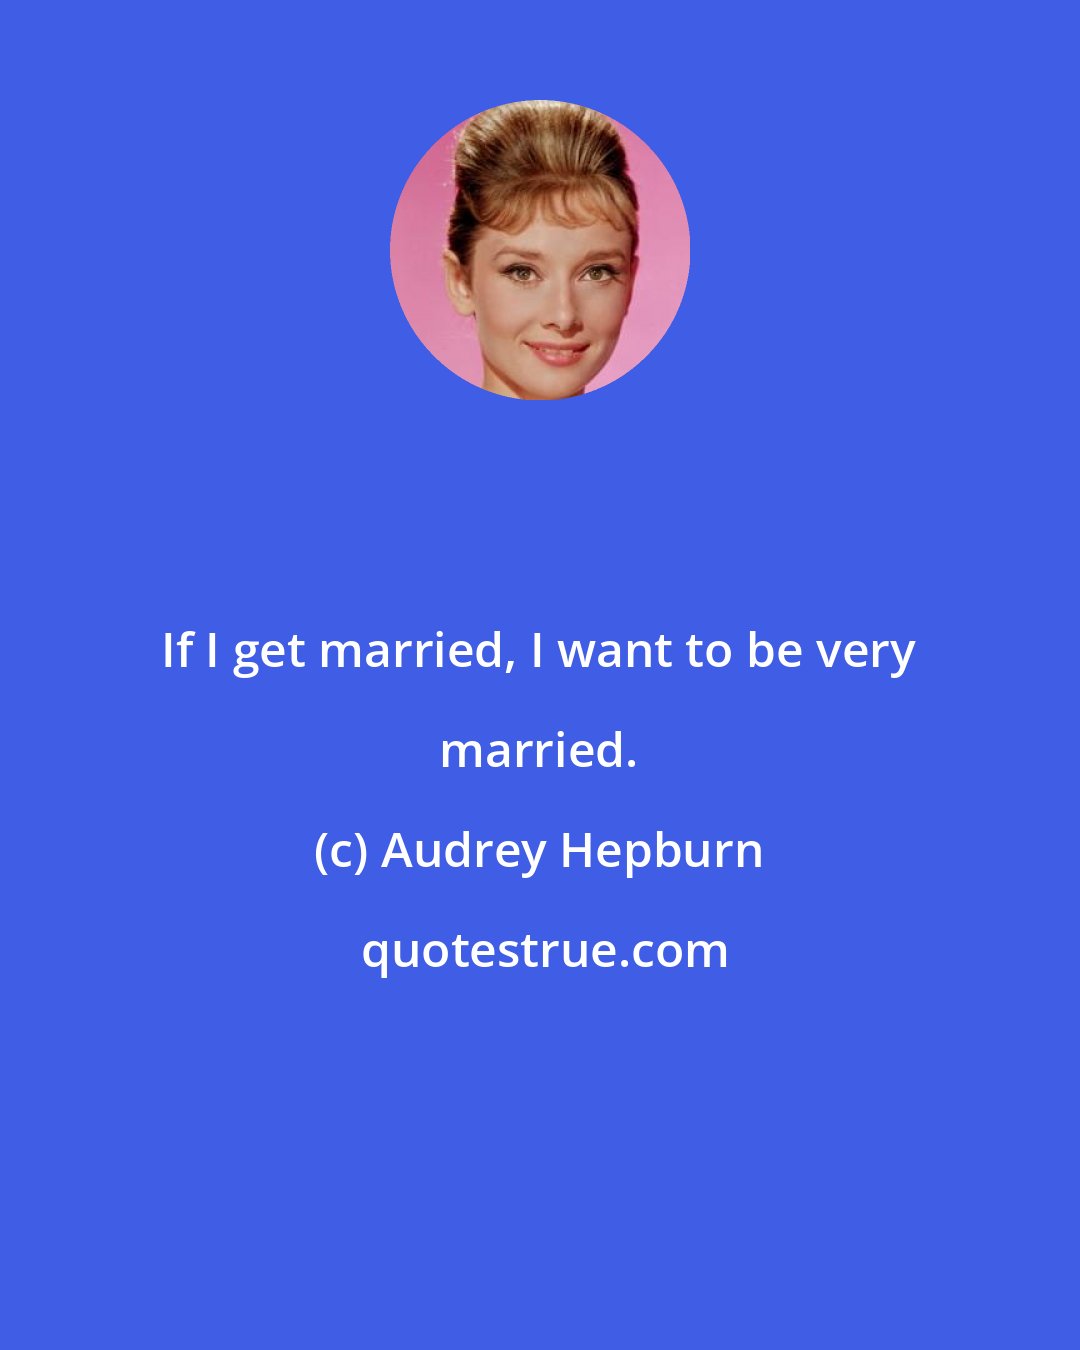 Audrey Hepburn: If I get married, I want to be very married.